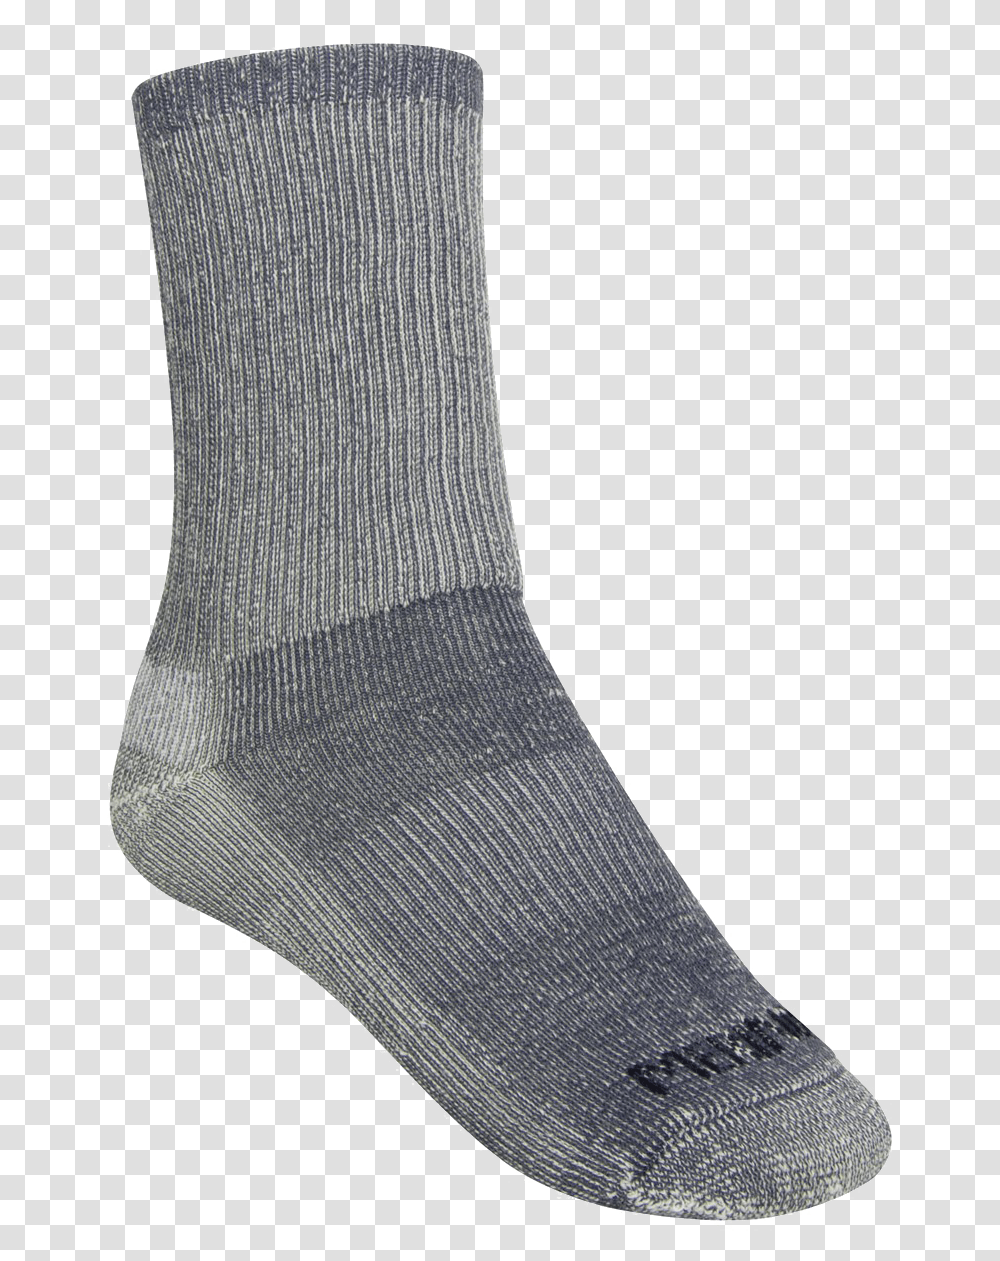 Socks Image Background Sock Background, Tie, Accessories, Accessory, Shoe Transparent Png